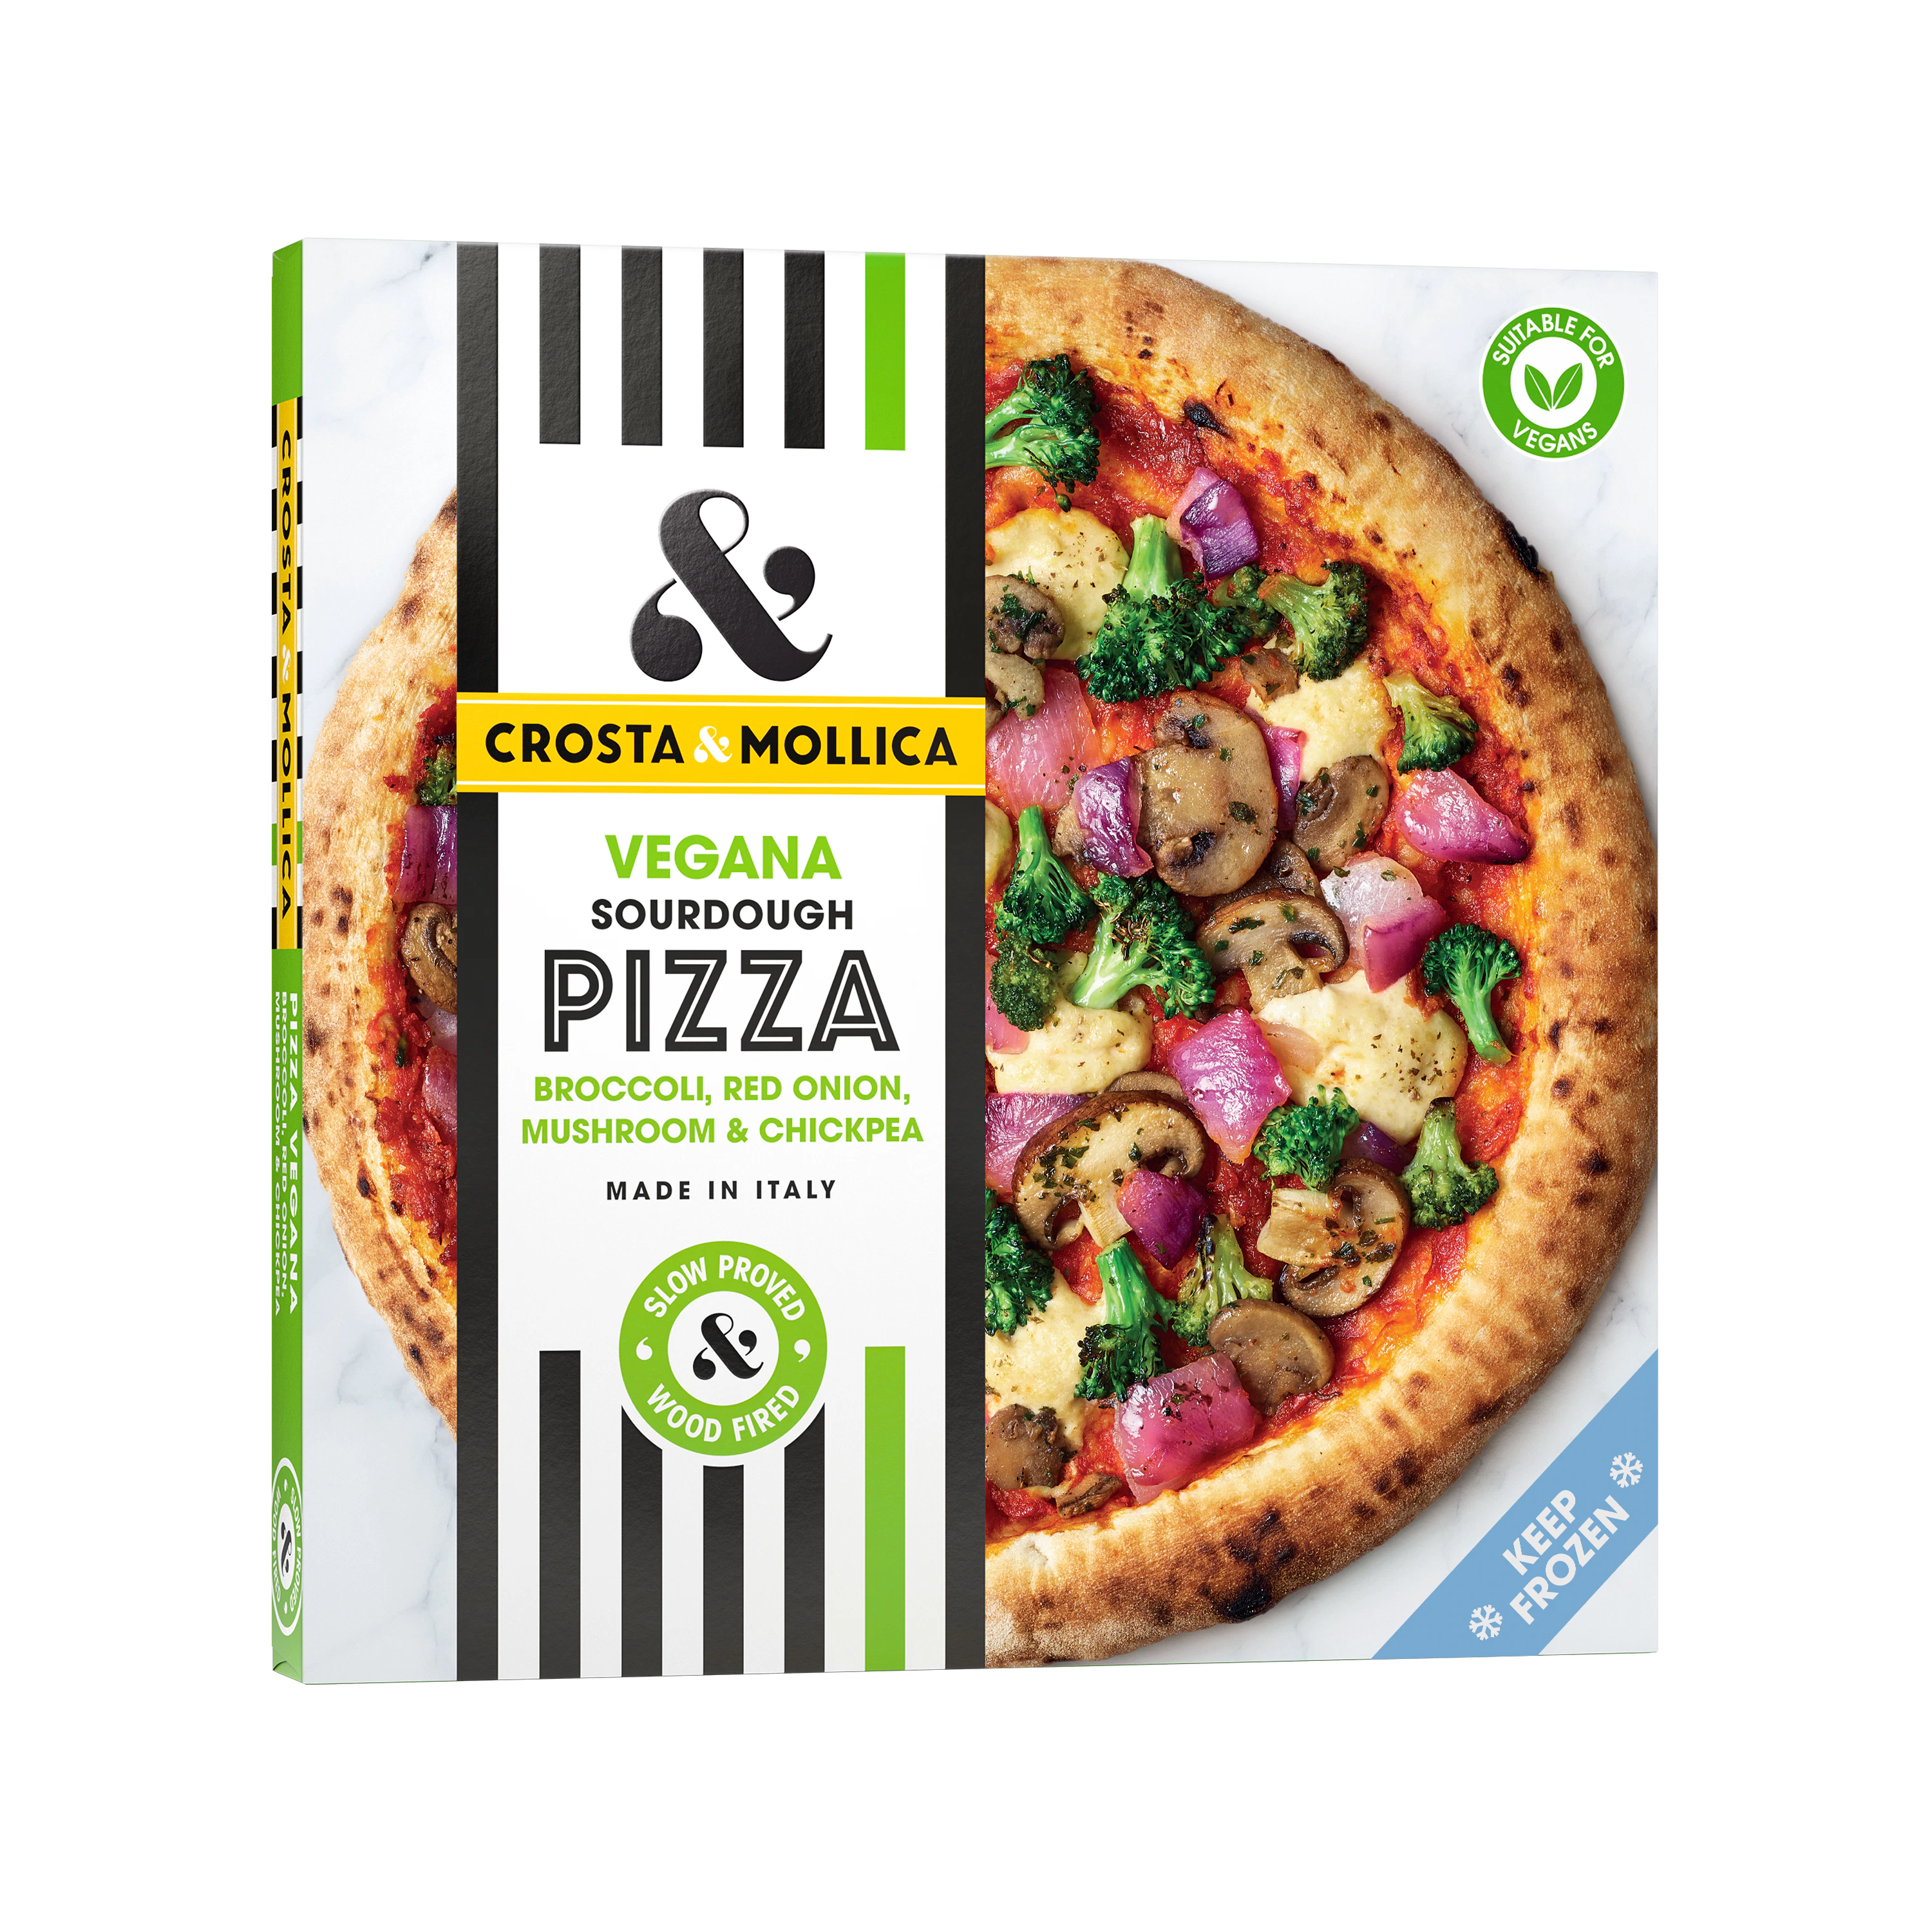 A Vegana packaging box with green and black stripes and a picture of a pizza on it.